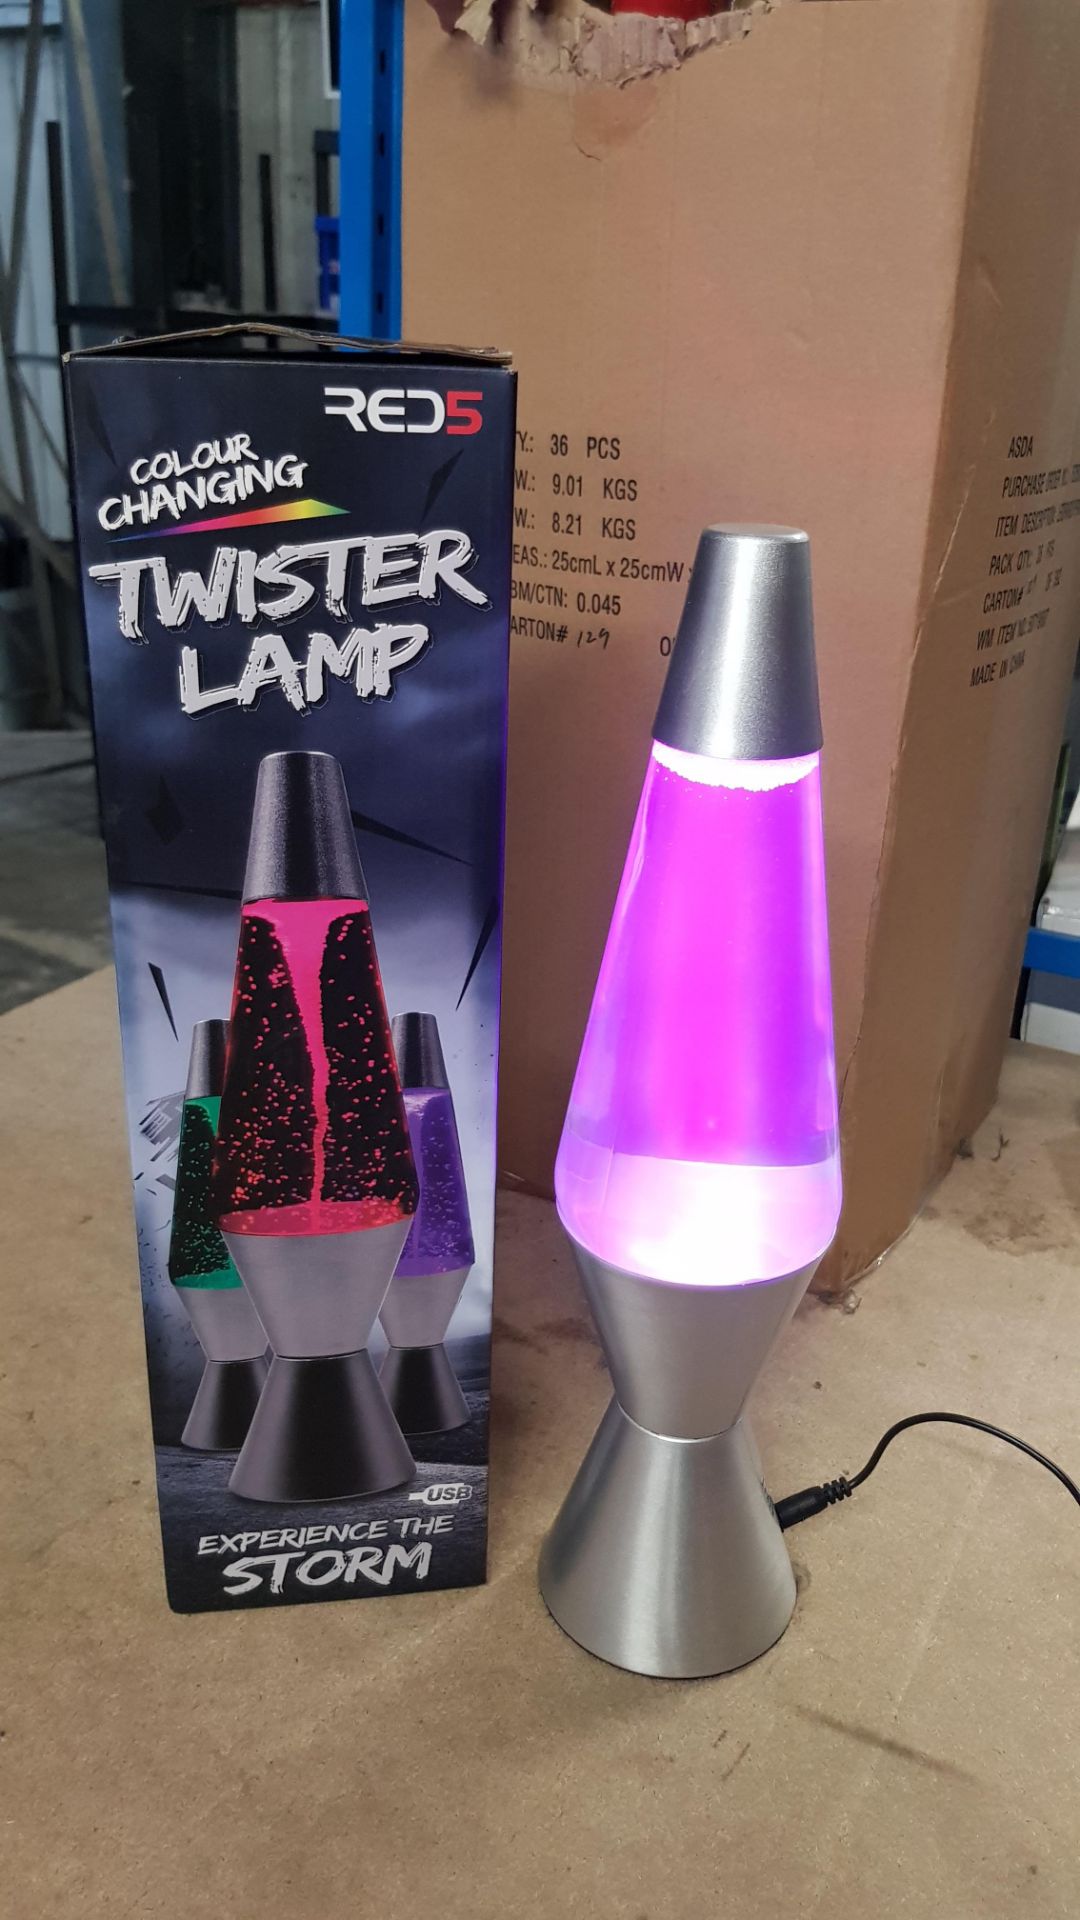 5x Red5 Colour Changing Twister Lamp RRP £14.99 Each. (Units Have RTM Sticker) - Image 5 of 5